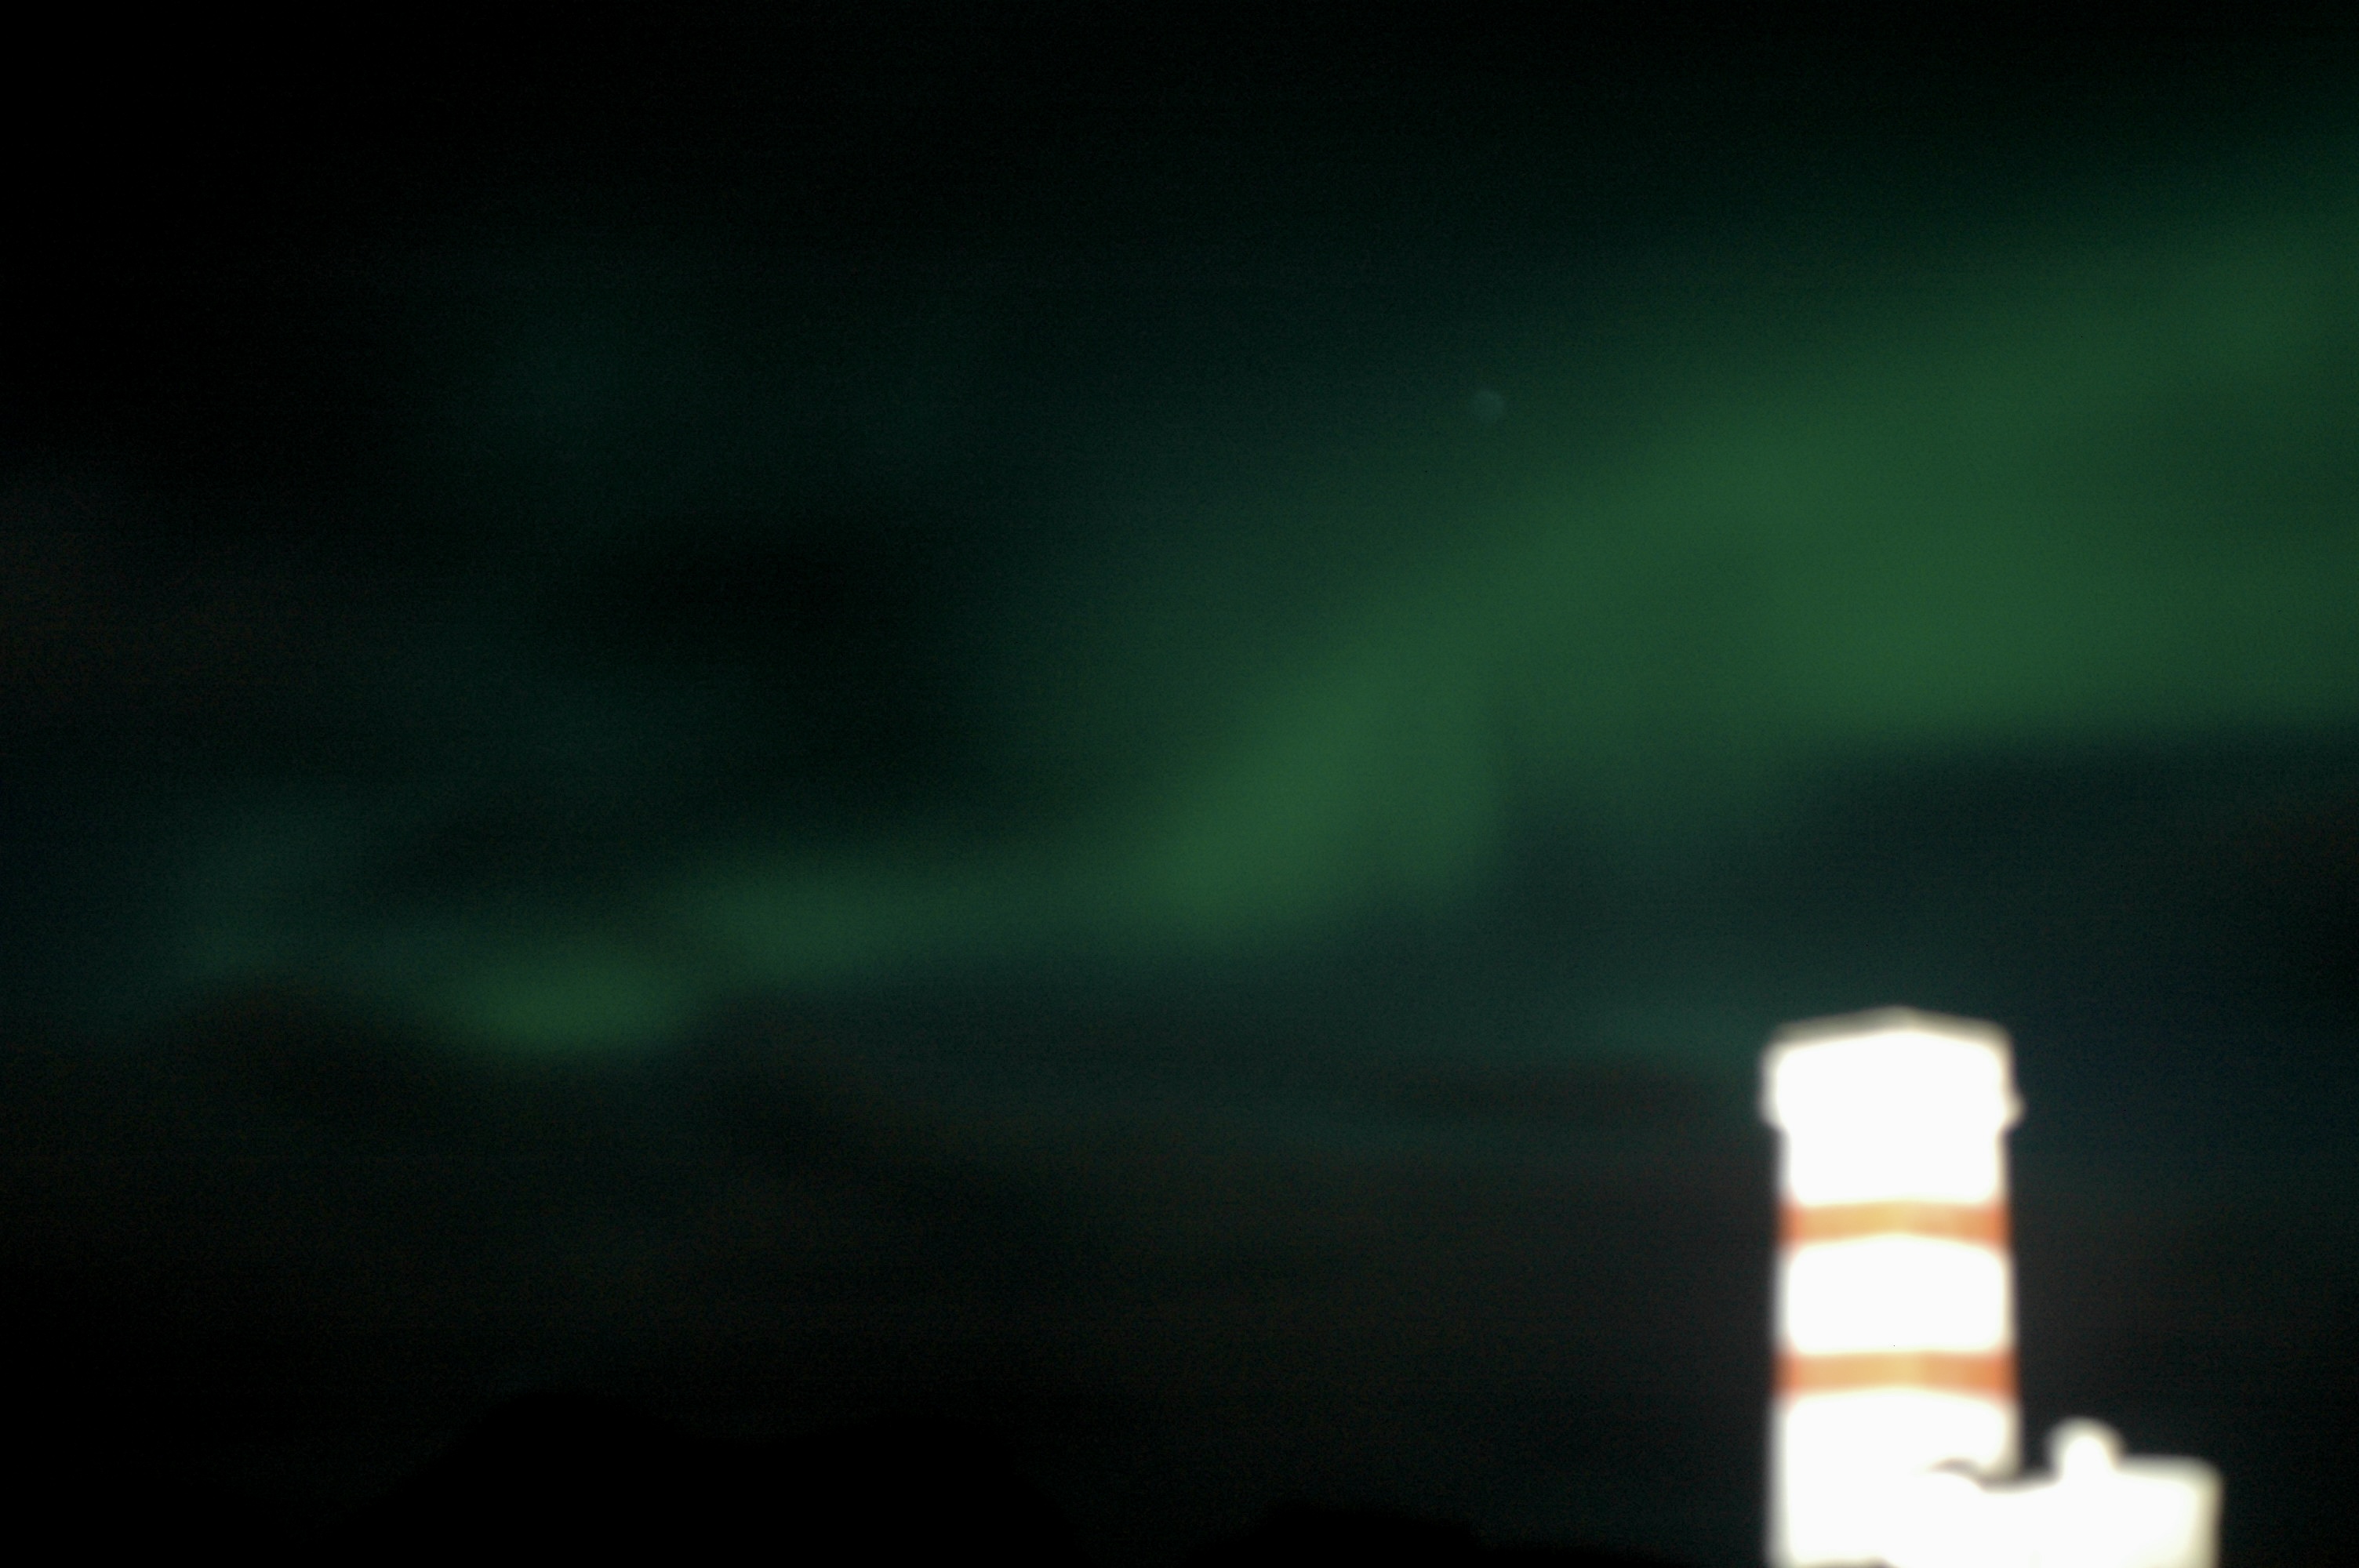 Out of focus photo of the norther lights in Iceland. There is an out of focus lighthouse in the foreground